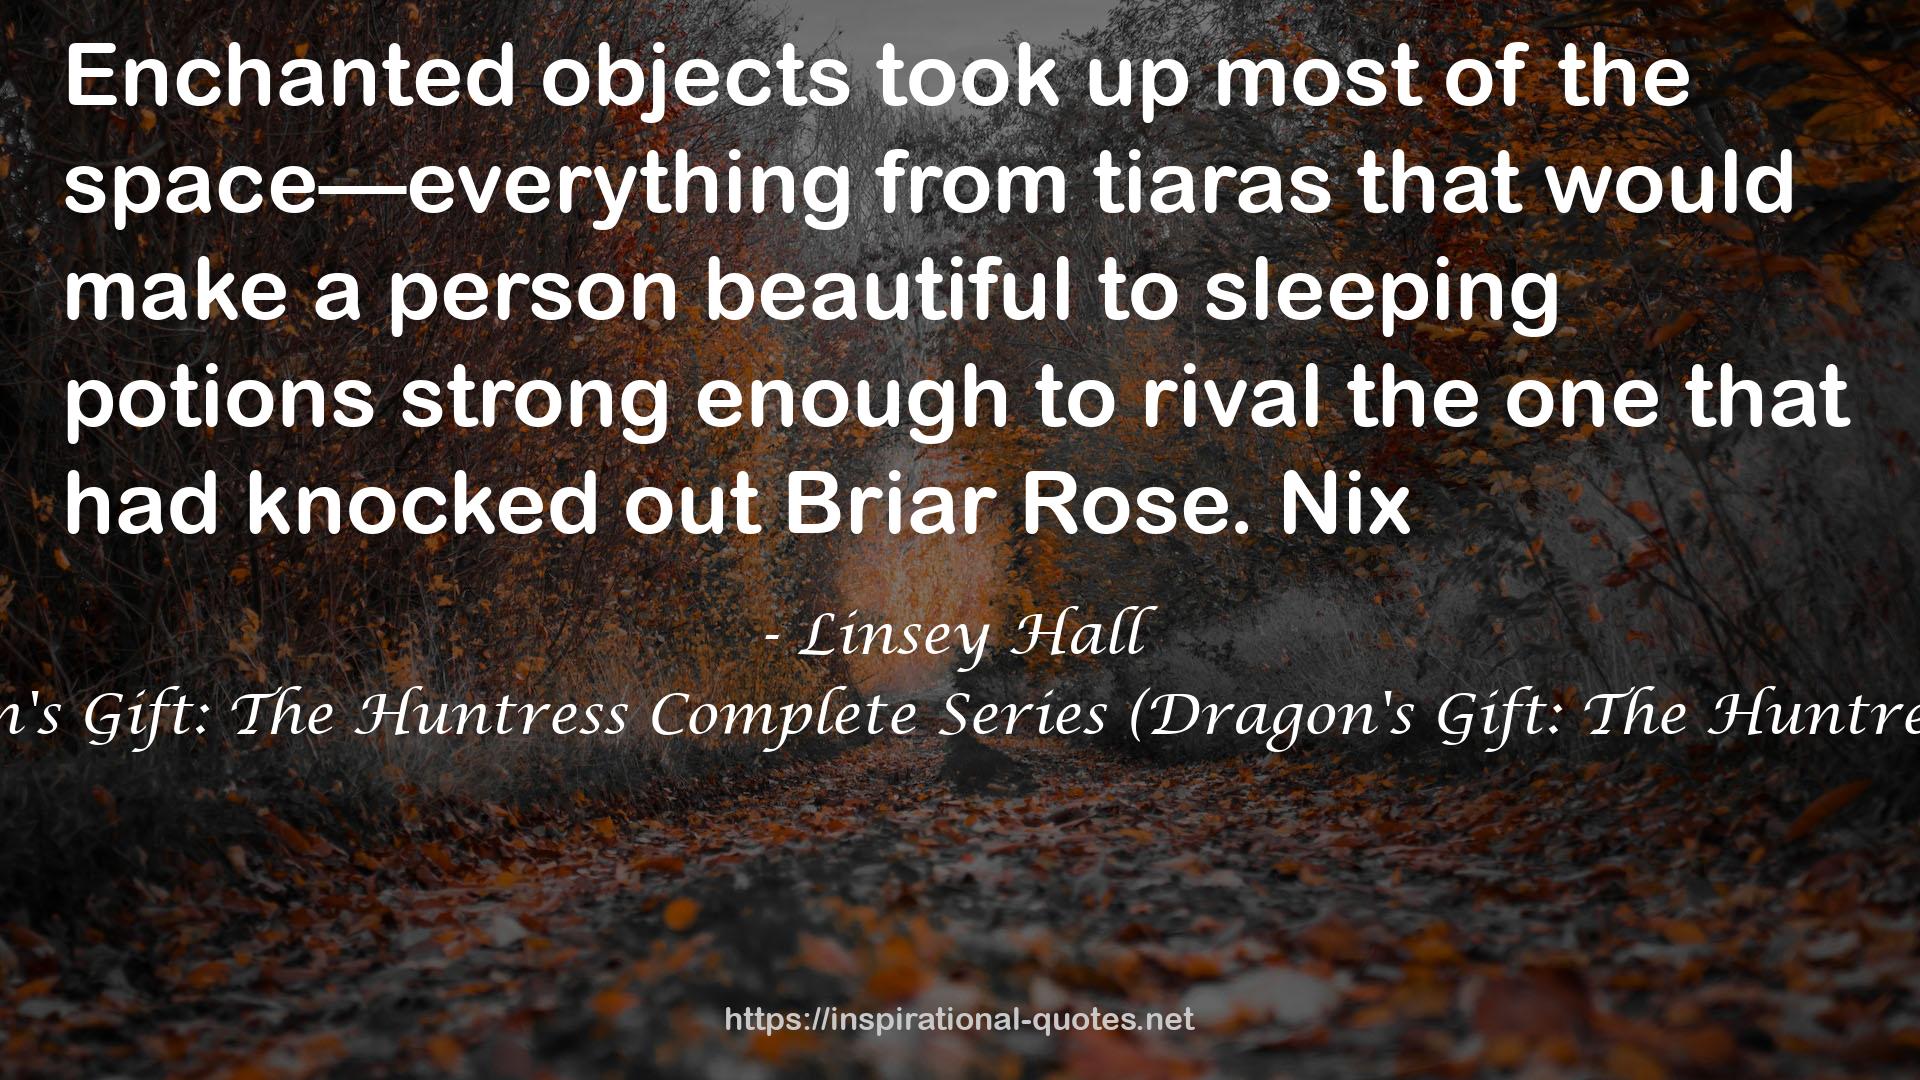 Dragon's Gift: The Huntress Complete Series (Dragon's Gift: The Huntress #1-5) QUOTES